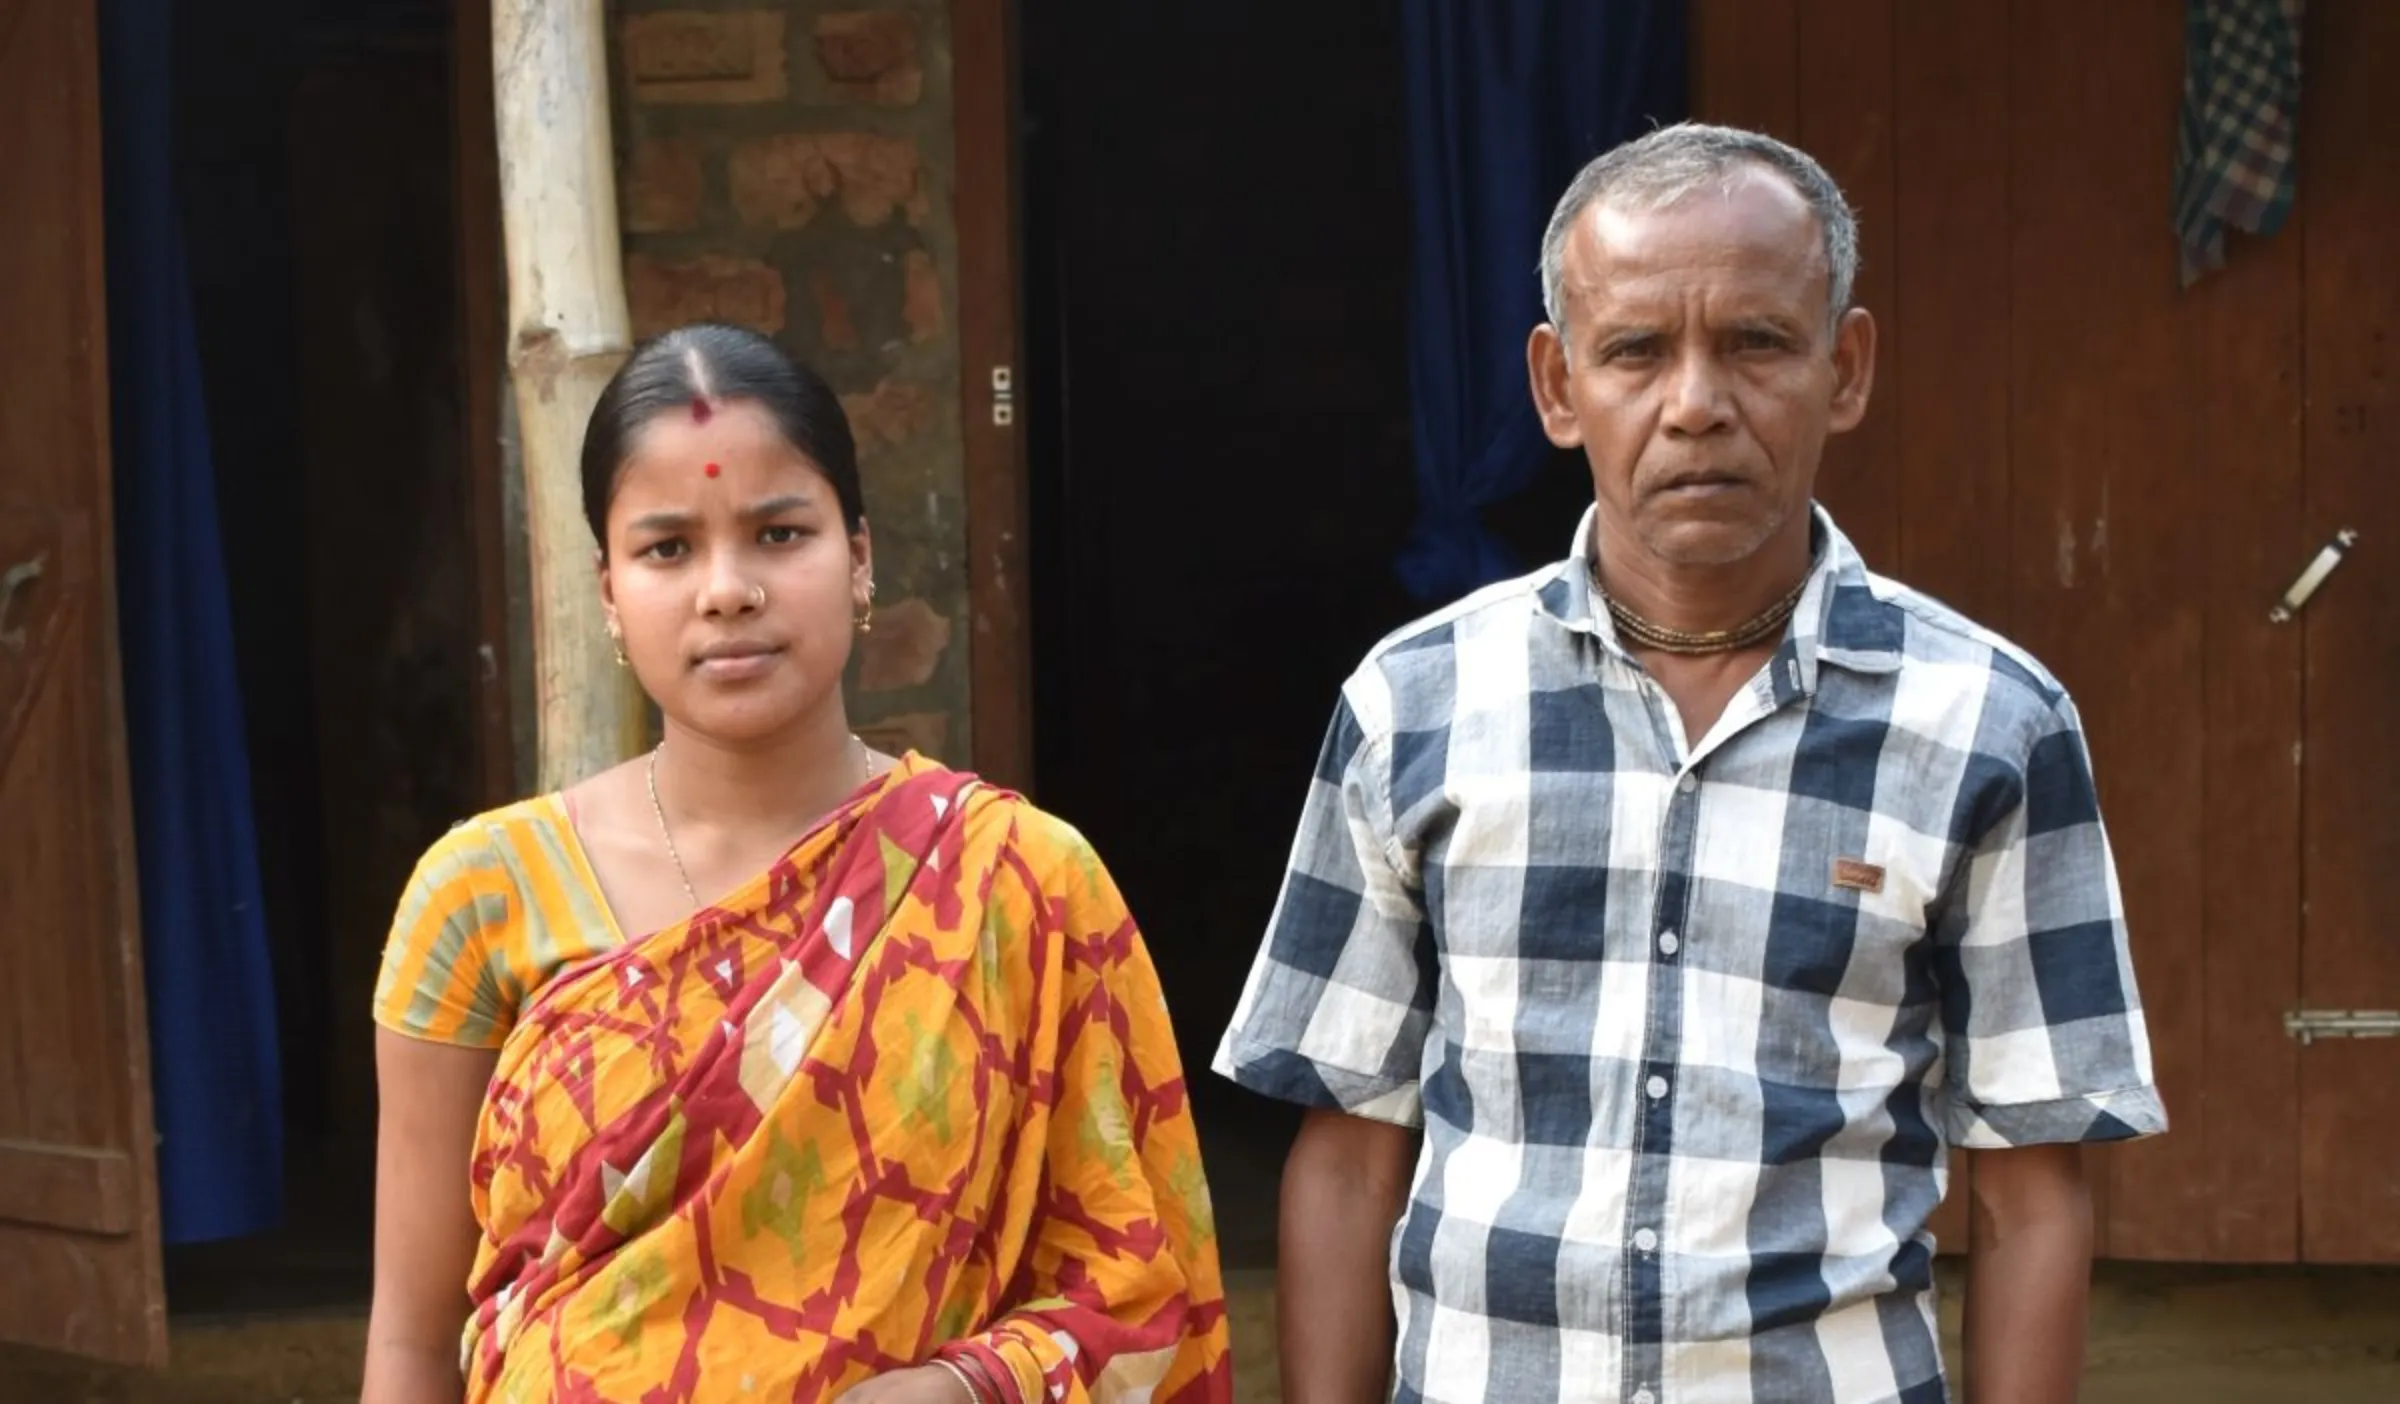 Teenage bride Pinku Das Sarkar, whose husband was arrested in the crackdown on child marriage, poses for a picture with her father-in-law Amulya Sarkar in front of her house in Radhanagar, India, February 28, 2023. Thomson Reuters Foundation/Biman Bora